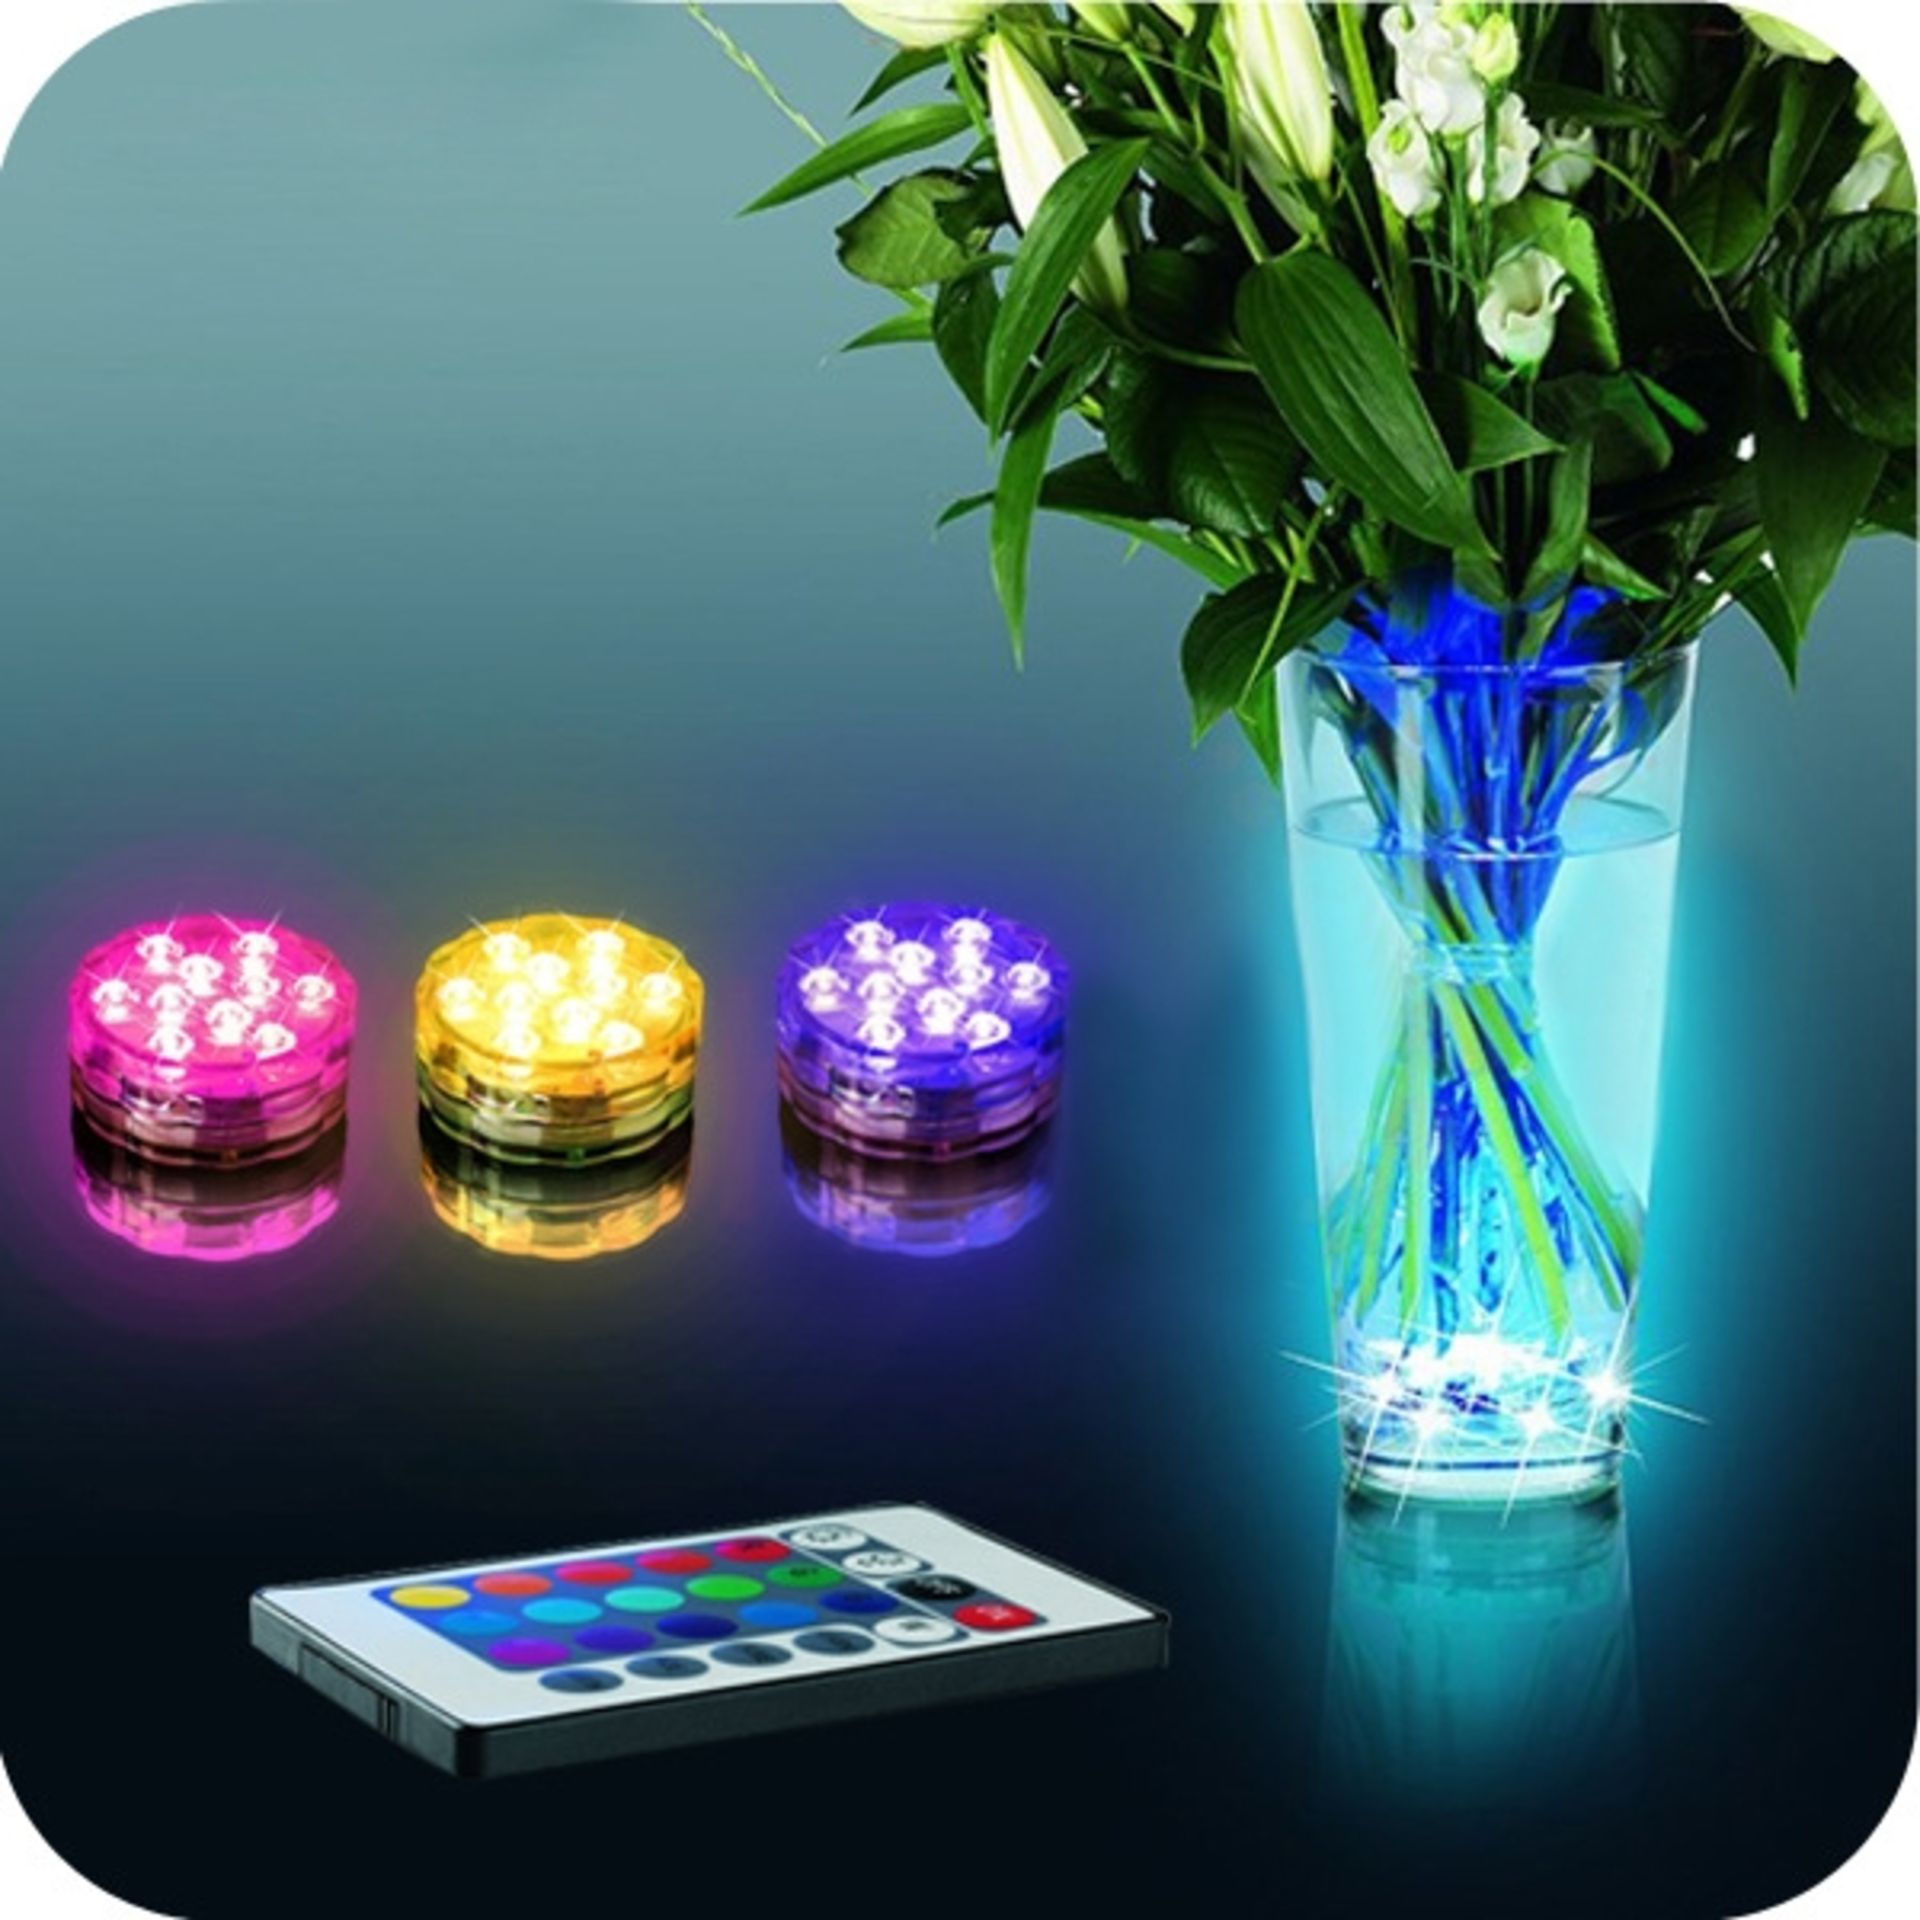 *TRADE QTY* Brand New Fully Waterproof/Submersible LED Colour Changing Light With Remote Conrol